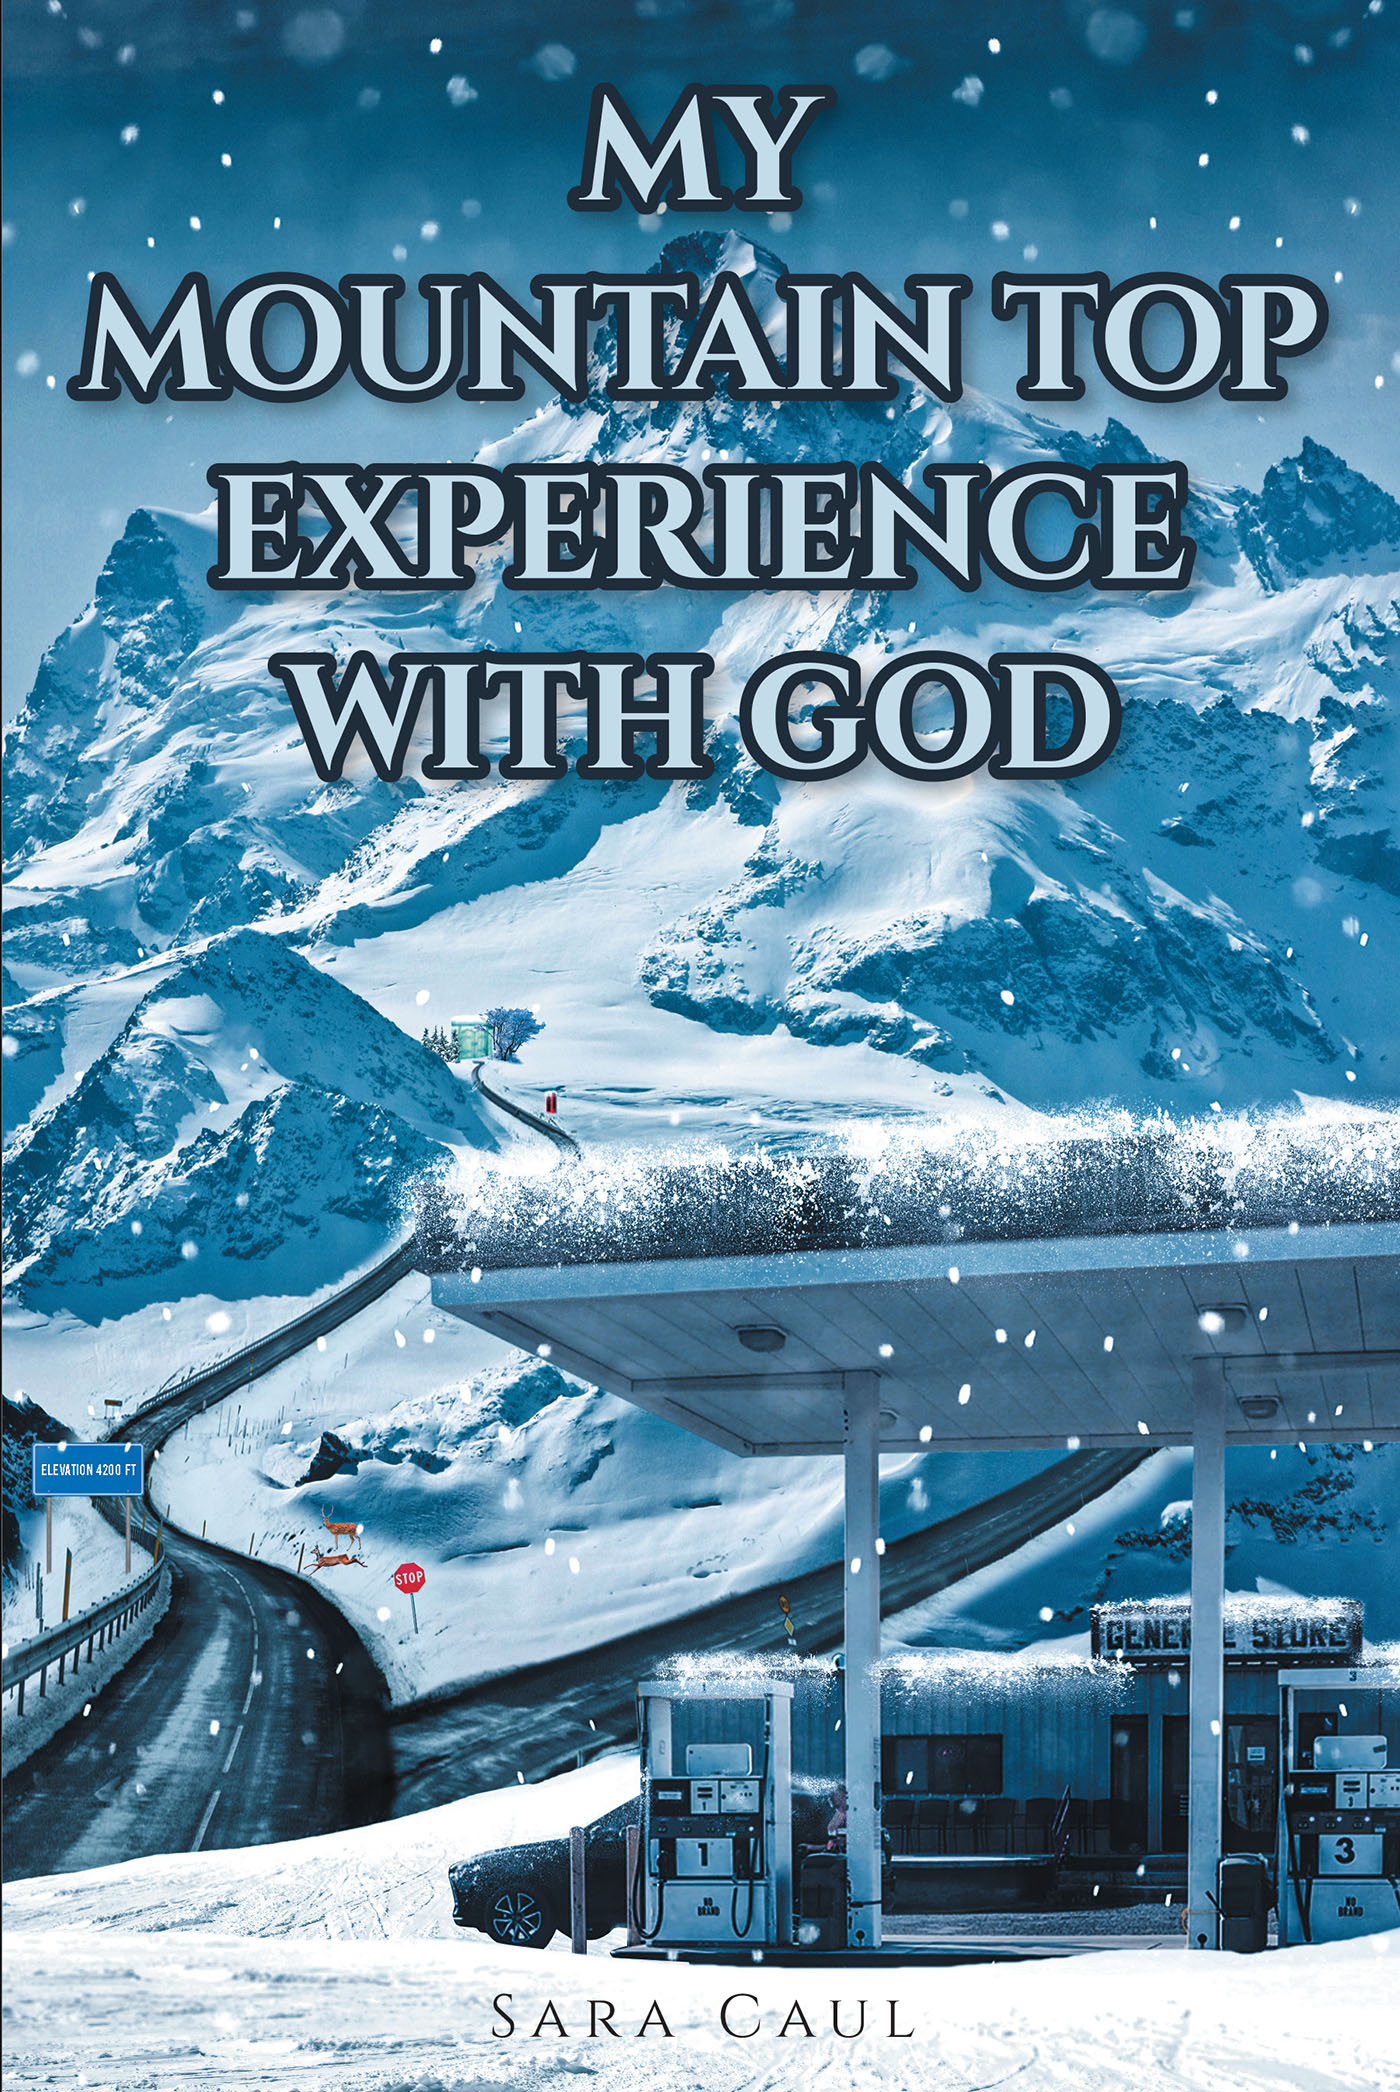 Author Sara Caul’s New Book, "My Mountain Top Experience with God," Explores the Life-Changing Event That Led to the Author Having a Profound Relationship with the Lord